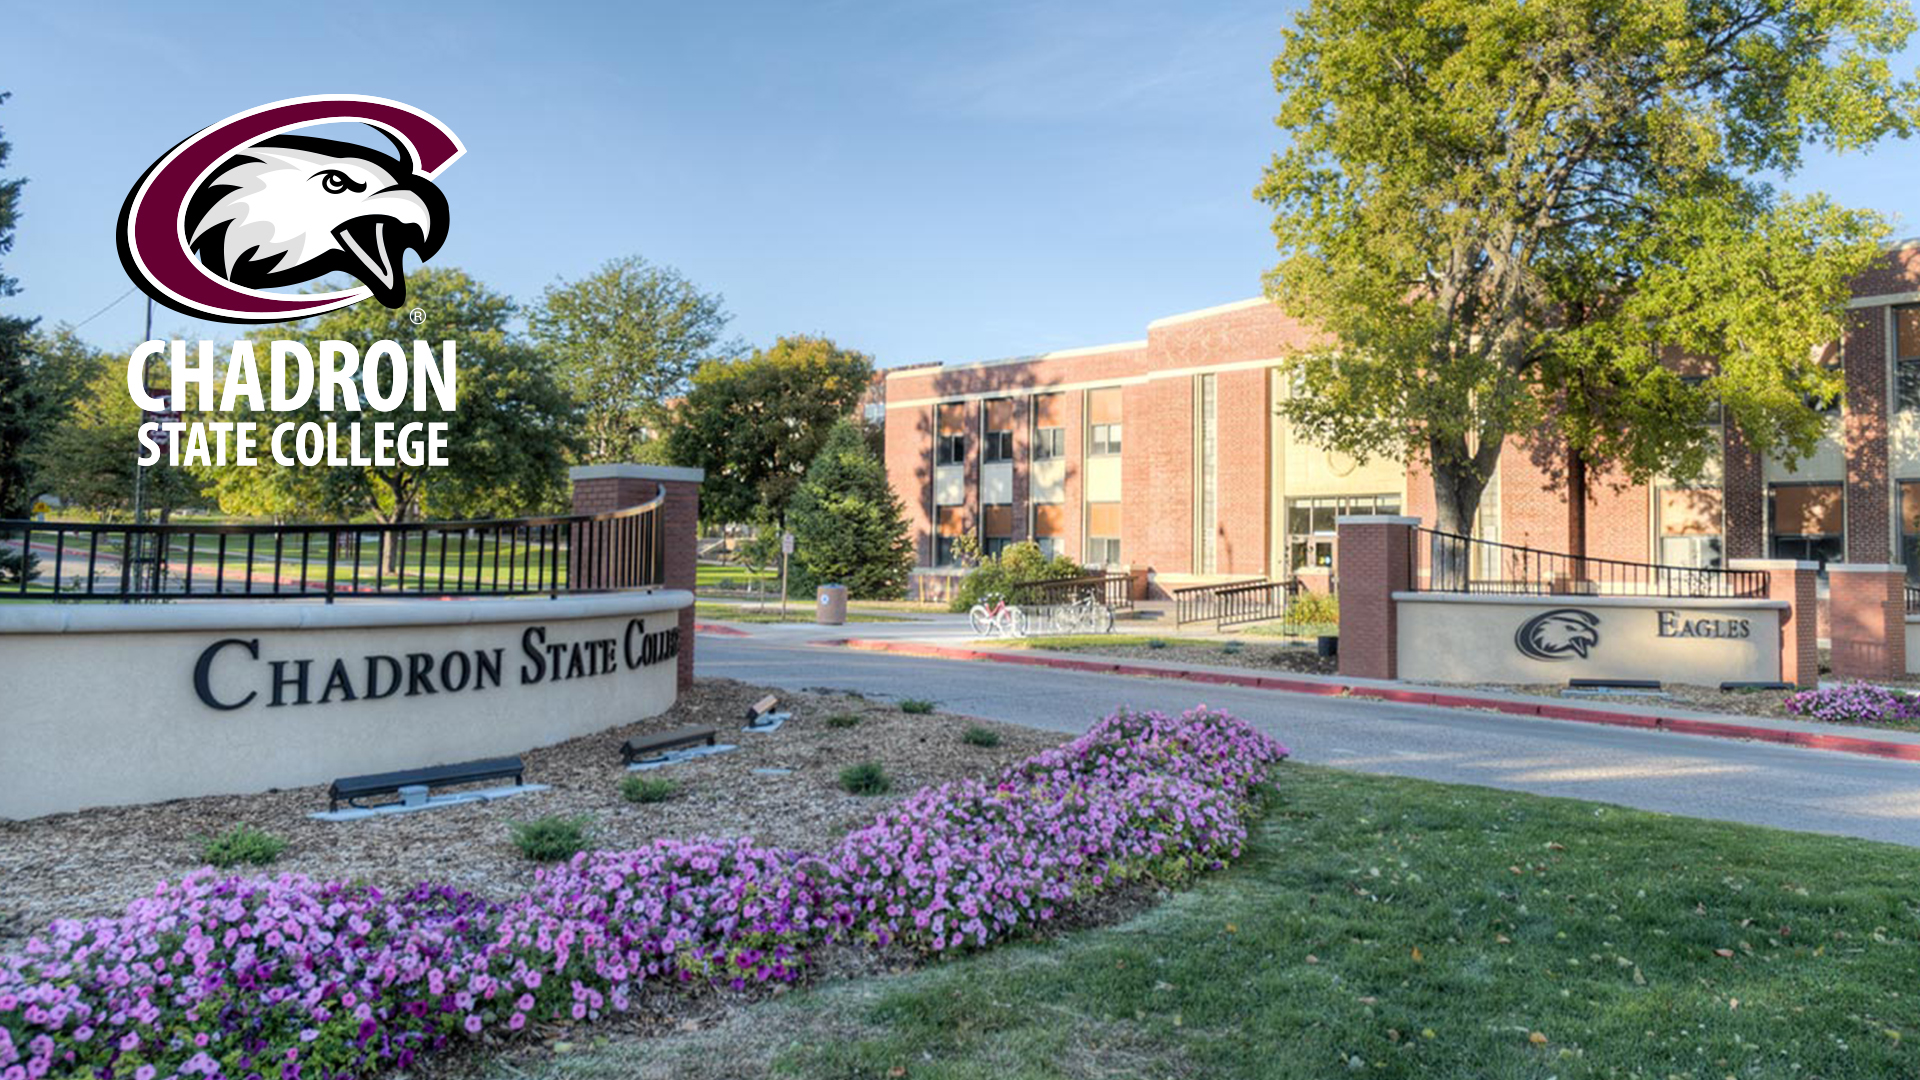 An image of the entry to Chadron State College from 10th & Main St. CSC Eagle logo with Chadron State College words underneath in white lettering. Left brown wall says Chadron State College. Right wall says Eagles.